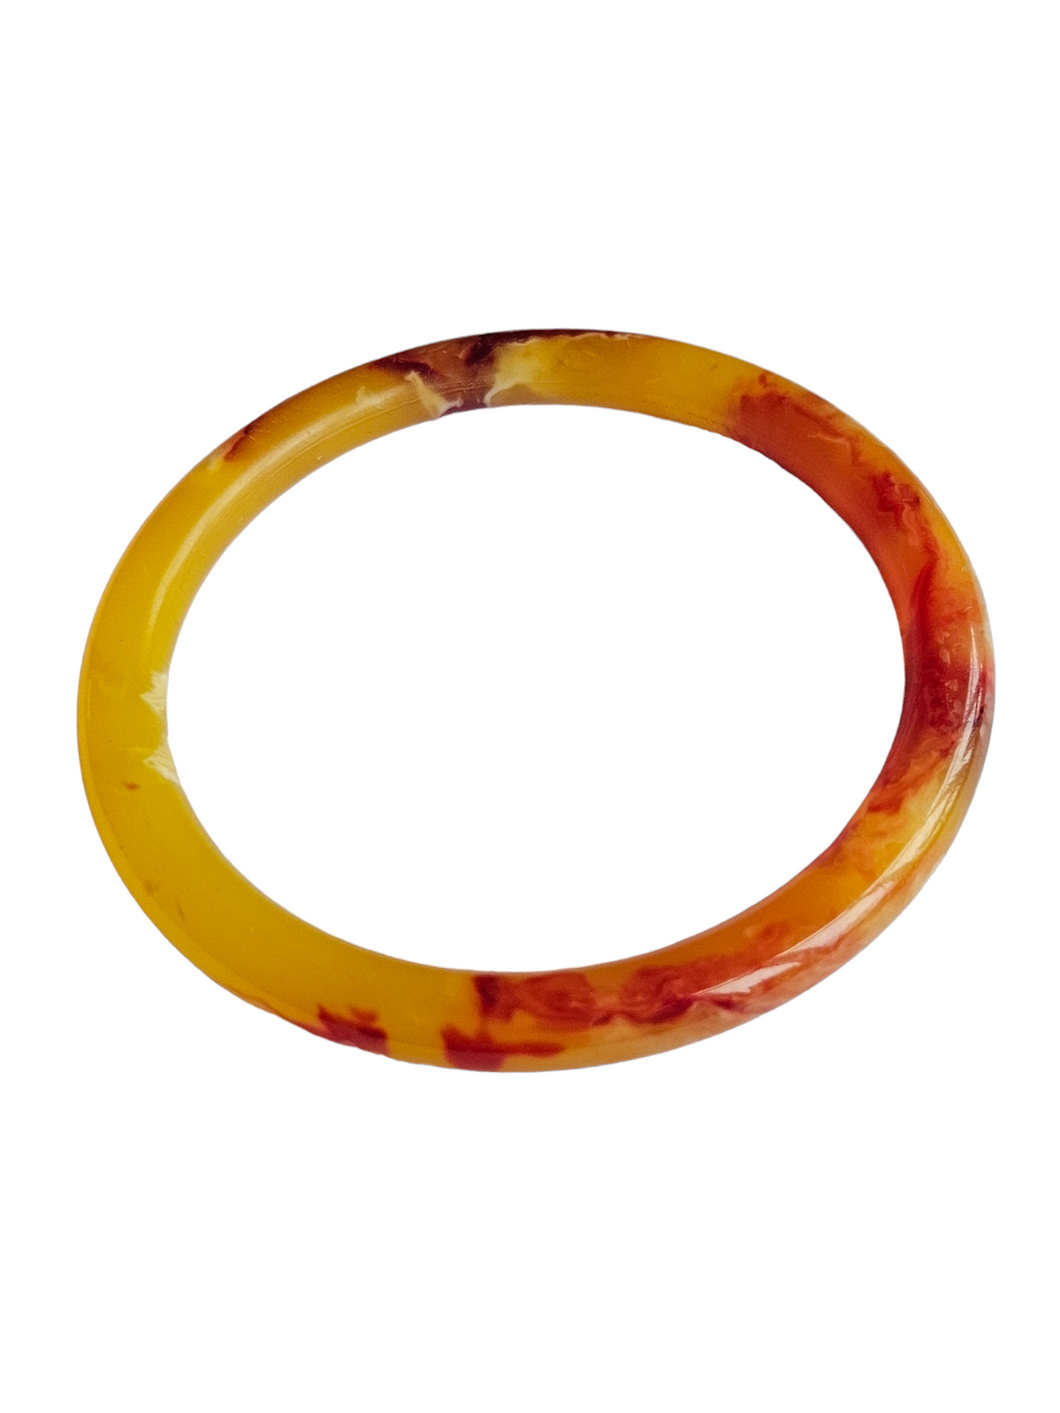 1930s Bright Marbled Orange and Yellow Galalith Bangle